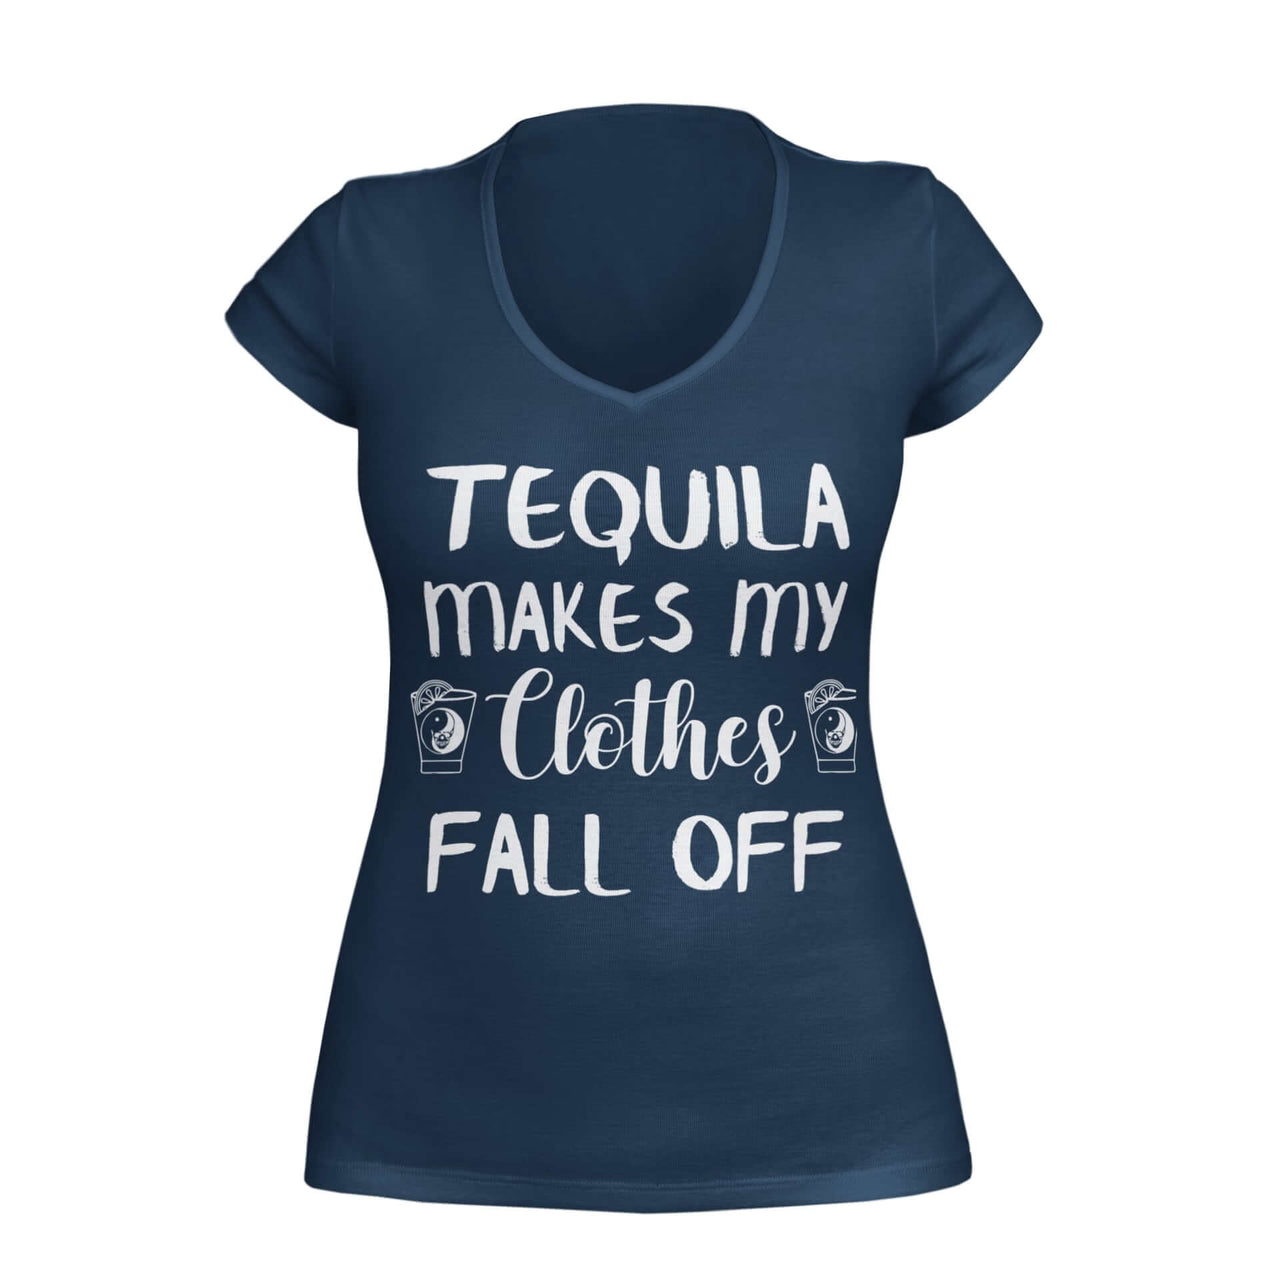  Navy VNeck T-shirt featuring the text 'Tequila makes my clothes fall off,' accompanied by an image of a shot glass with a yin yang symbol on each side of the words. Designed by WooHoo Apparel.